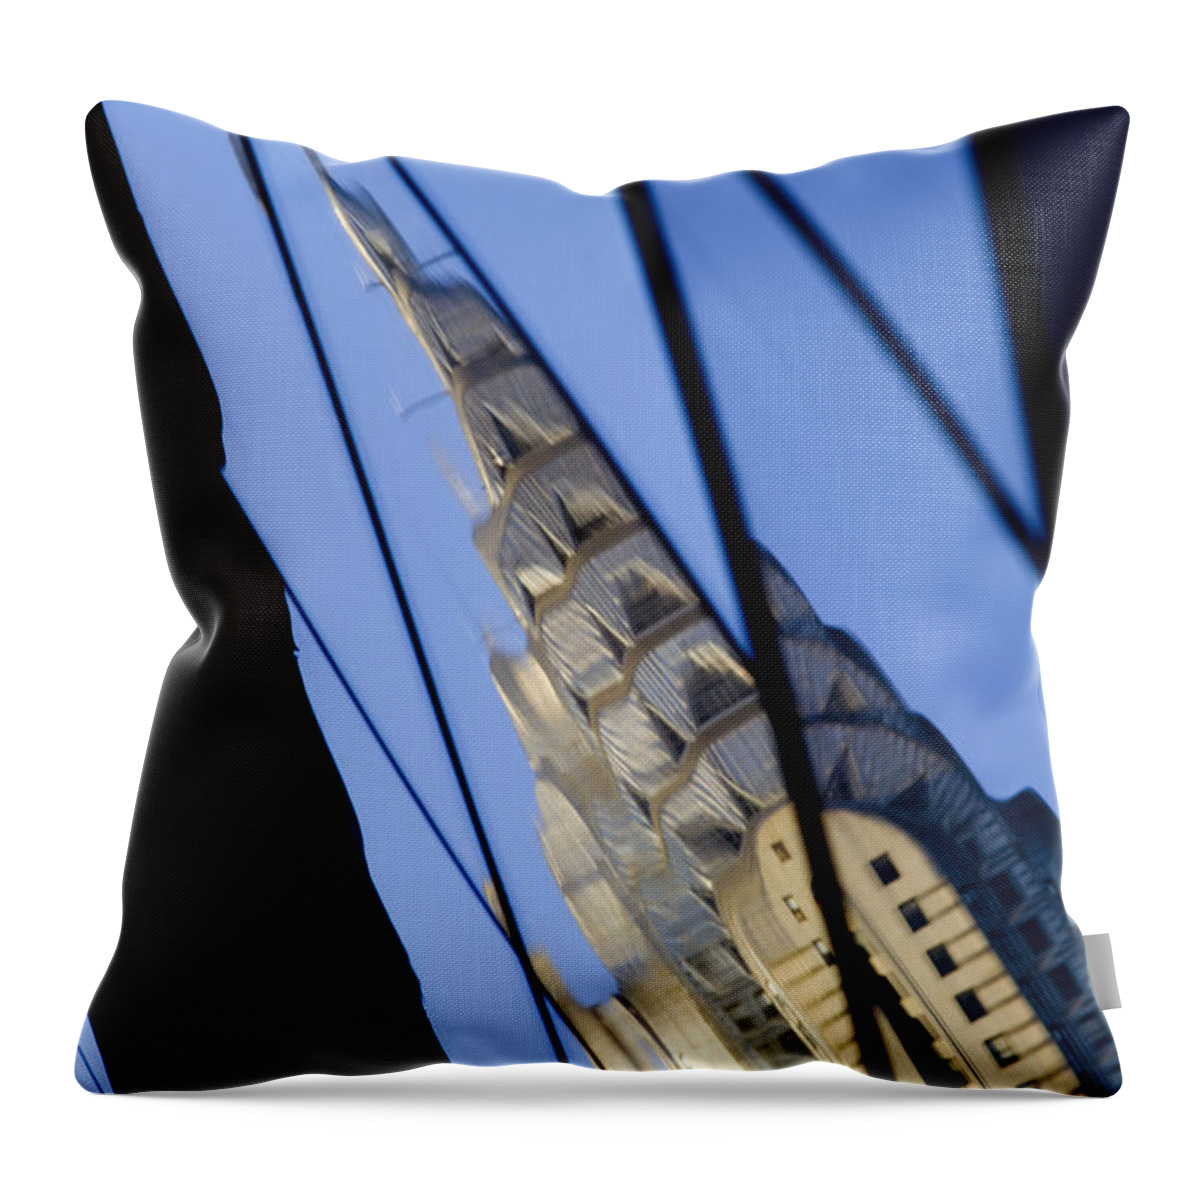 Chrysler Throw Pillow featuring the photograph Chrysler Building by Tony Cordoza